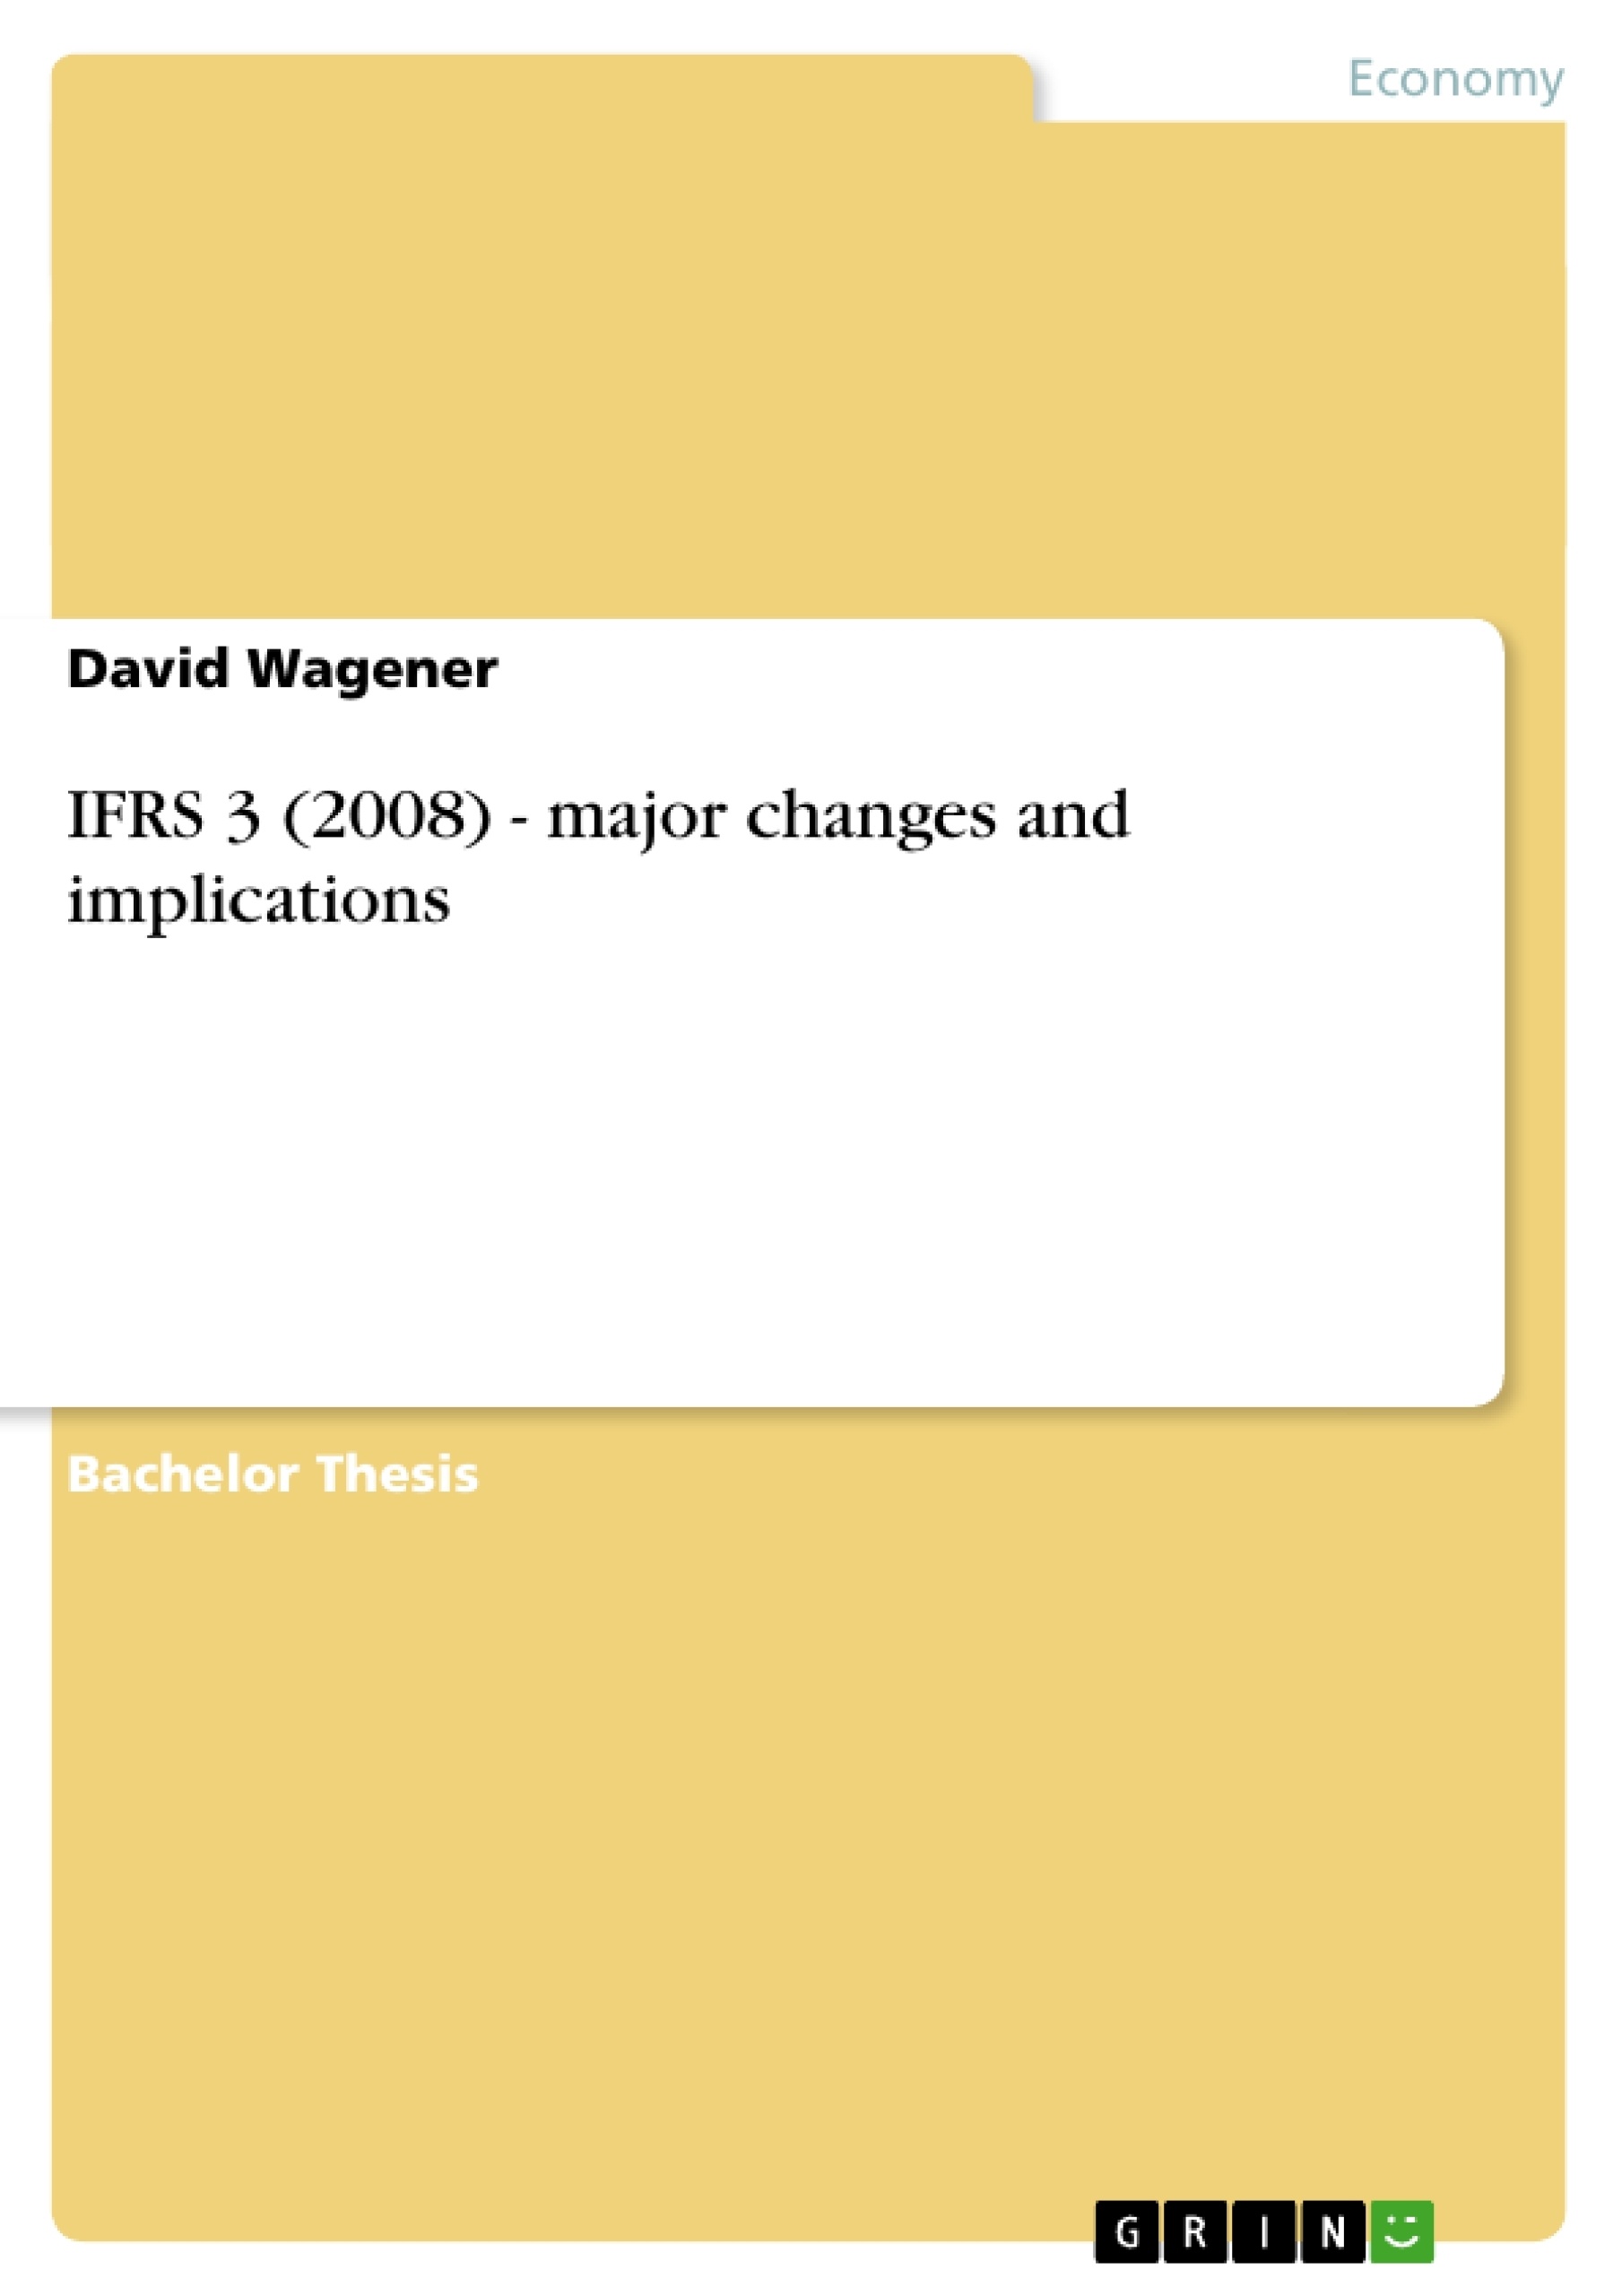 Title: IFRS 3 (2008) - major changes and implications